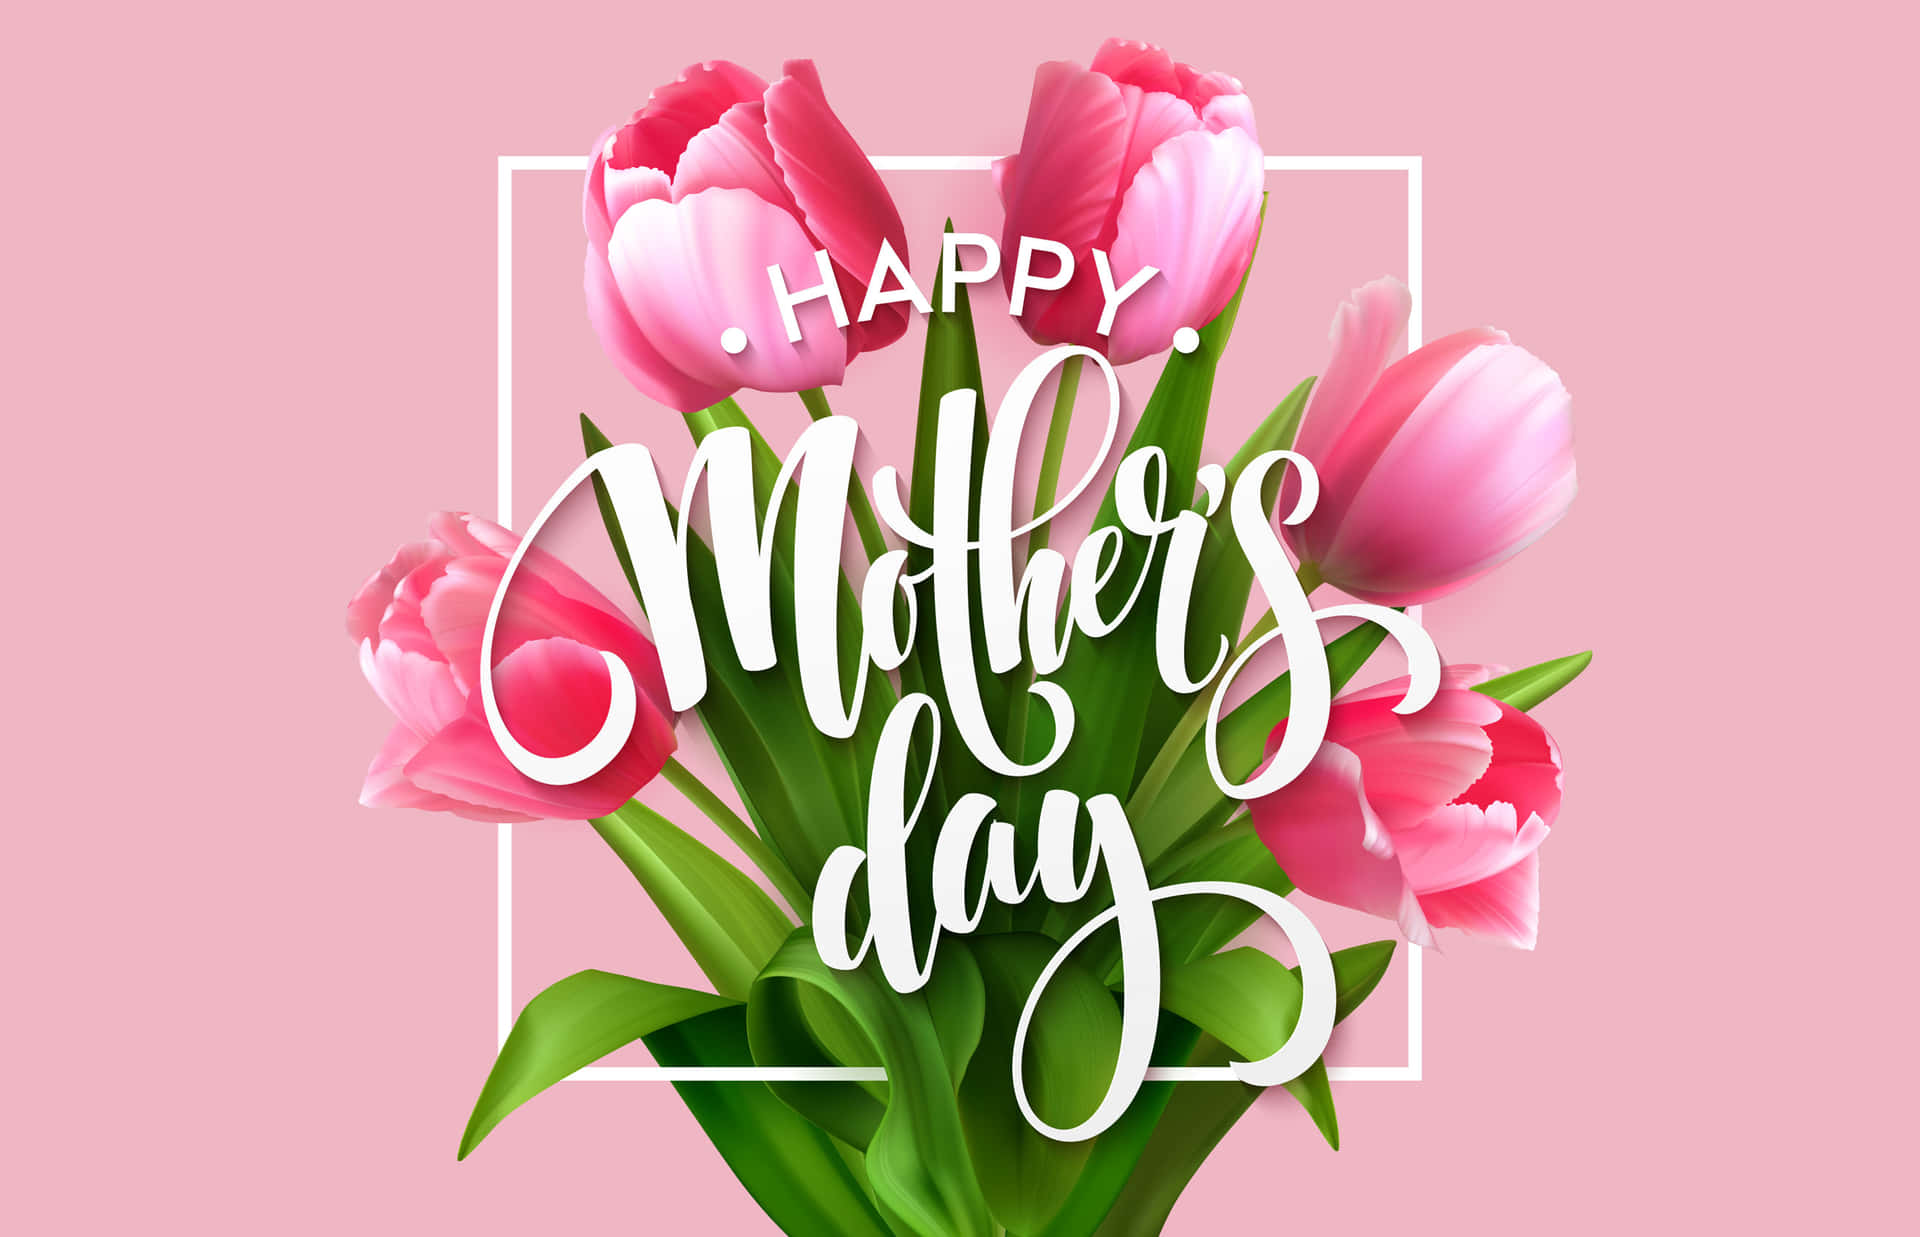 Celebrate motherhood with Happy Mother's Day!